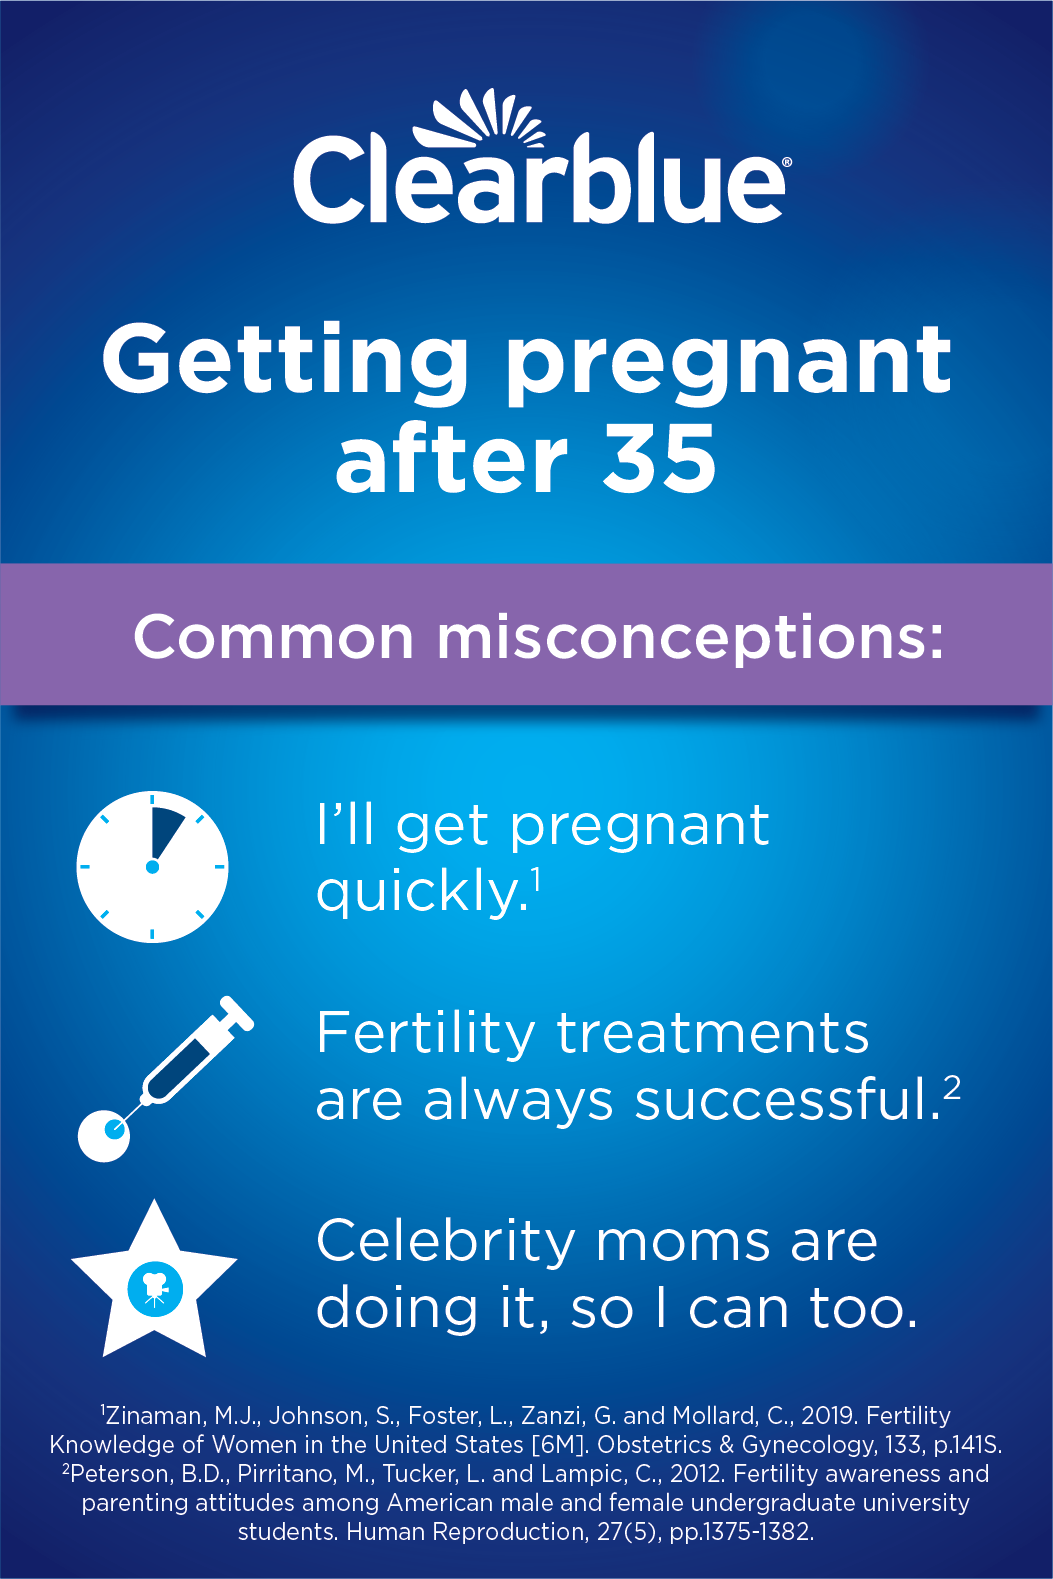 Misconceptions about getting pregnant after 35